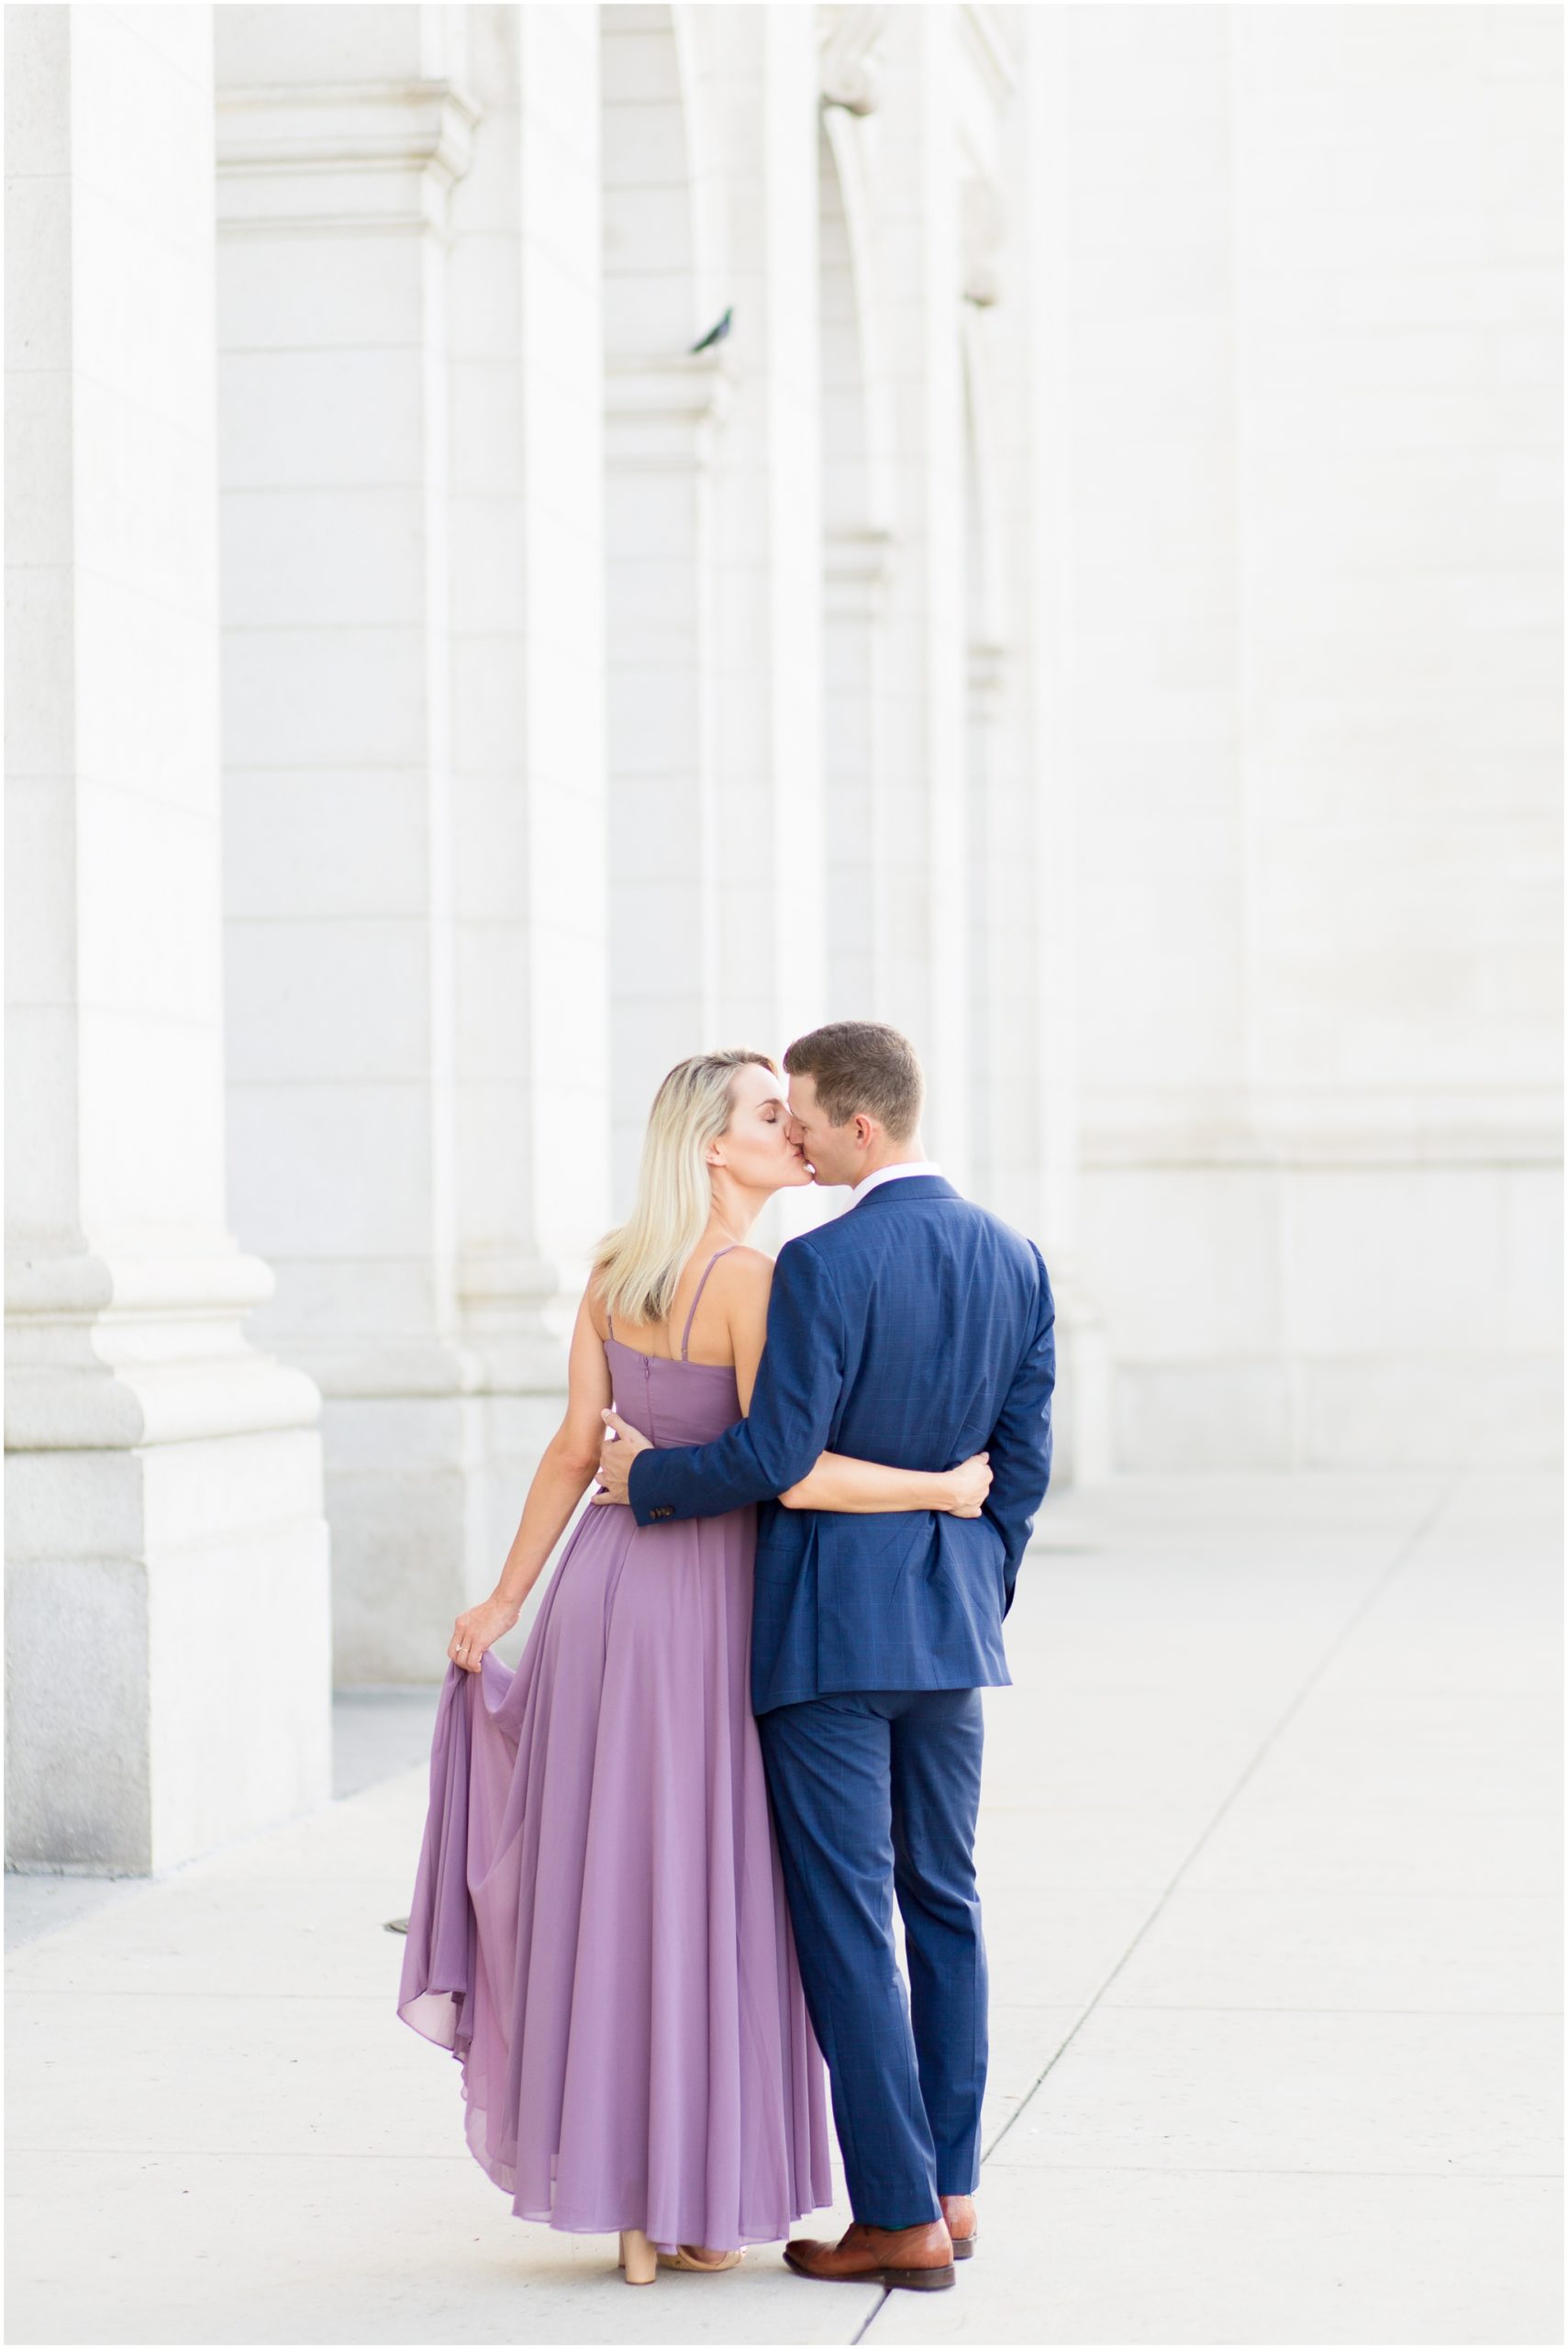 Black tie DC wedding venue Union Station wedding captured by Taylor Rose Photography